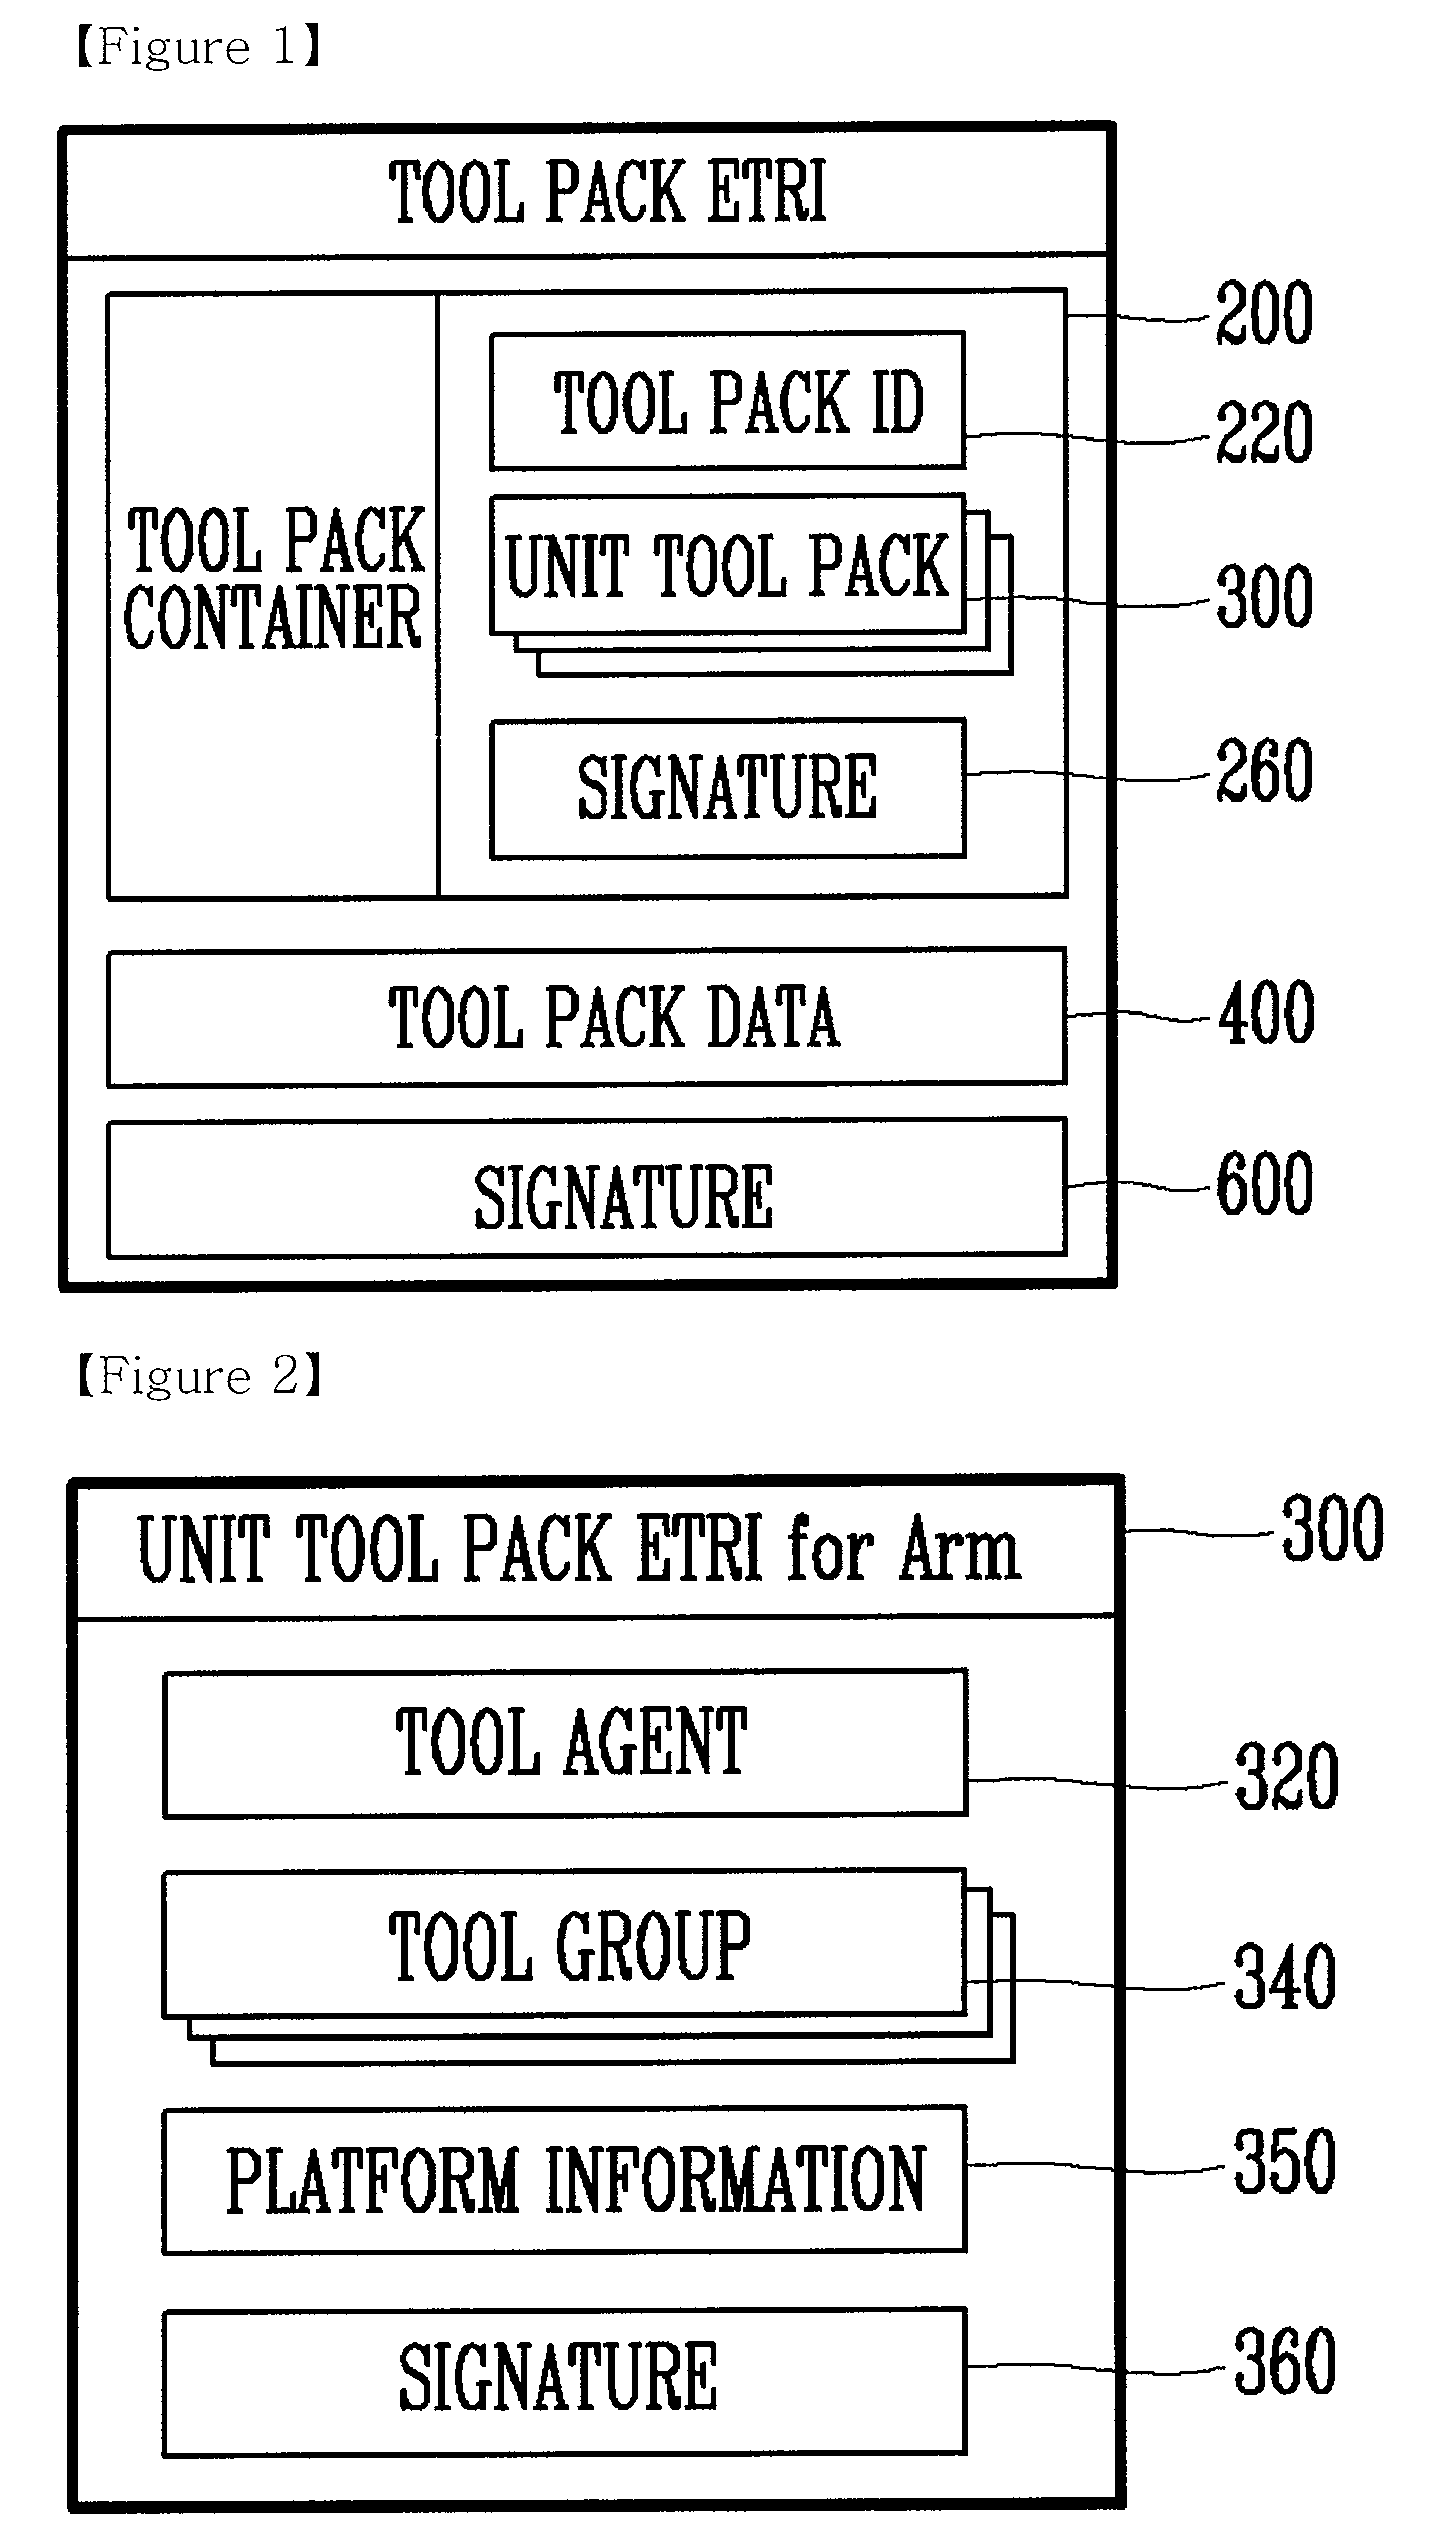 Tool pack structure and contents execution device